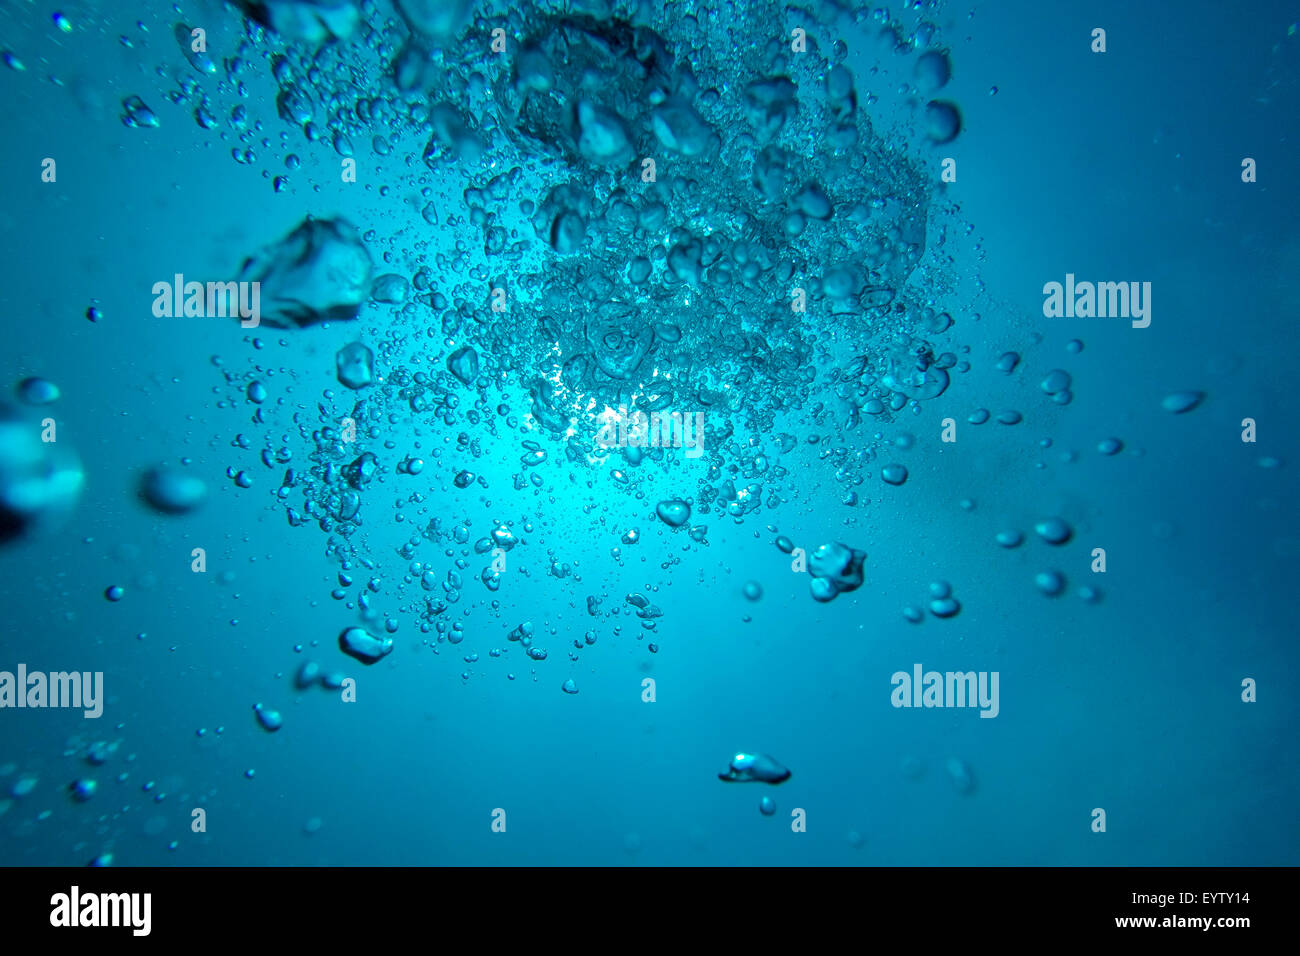 Free AI Image  Blue and transparent water of the Mediterranean sea.  Sunlight, multiple bubbles